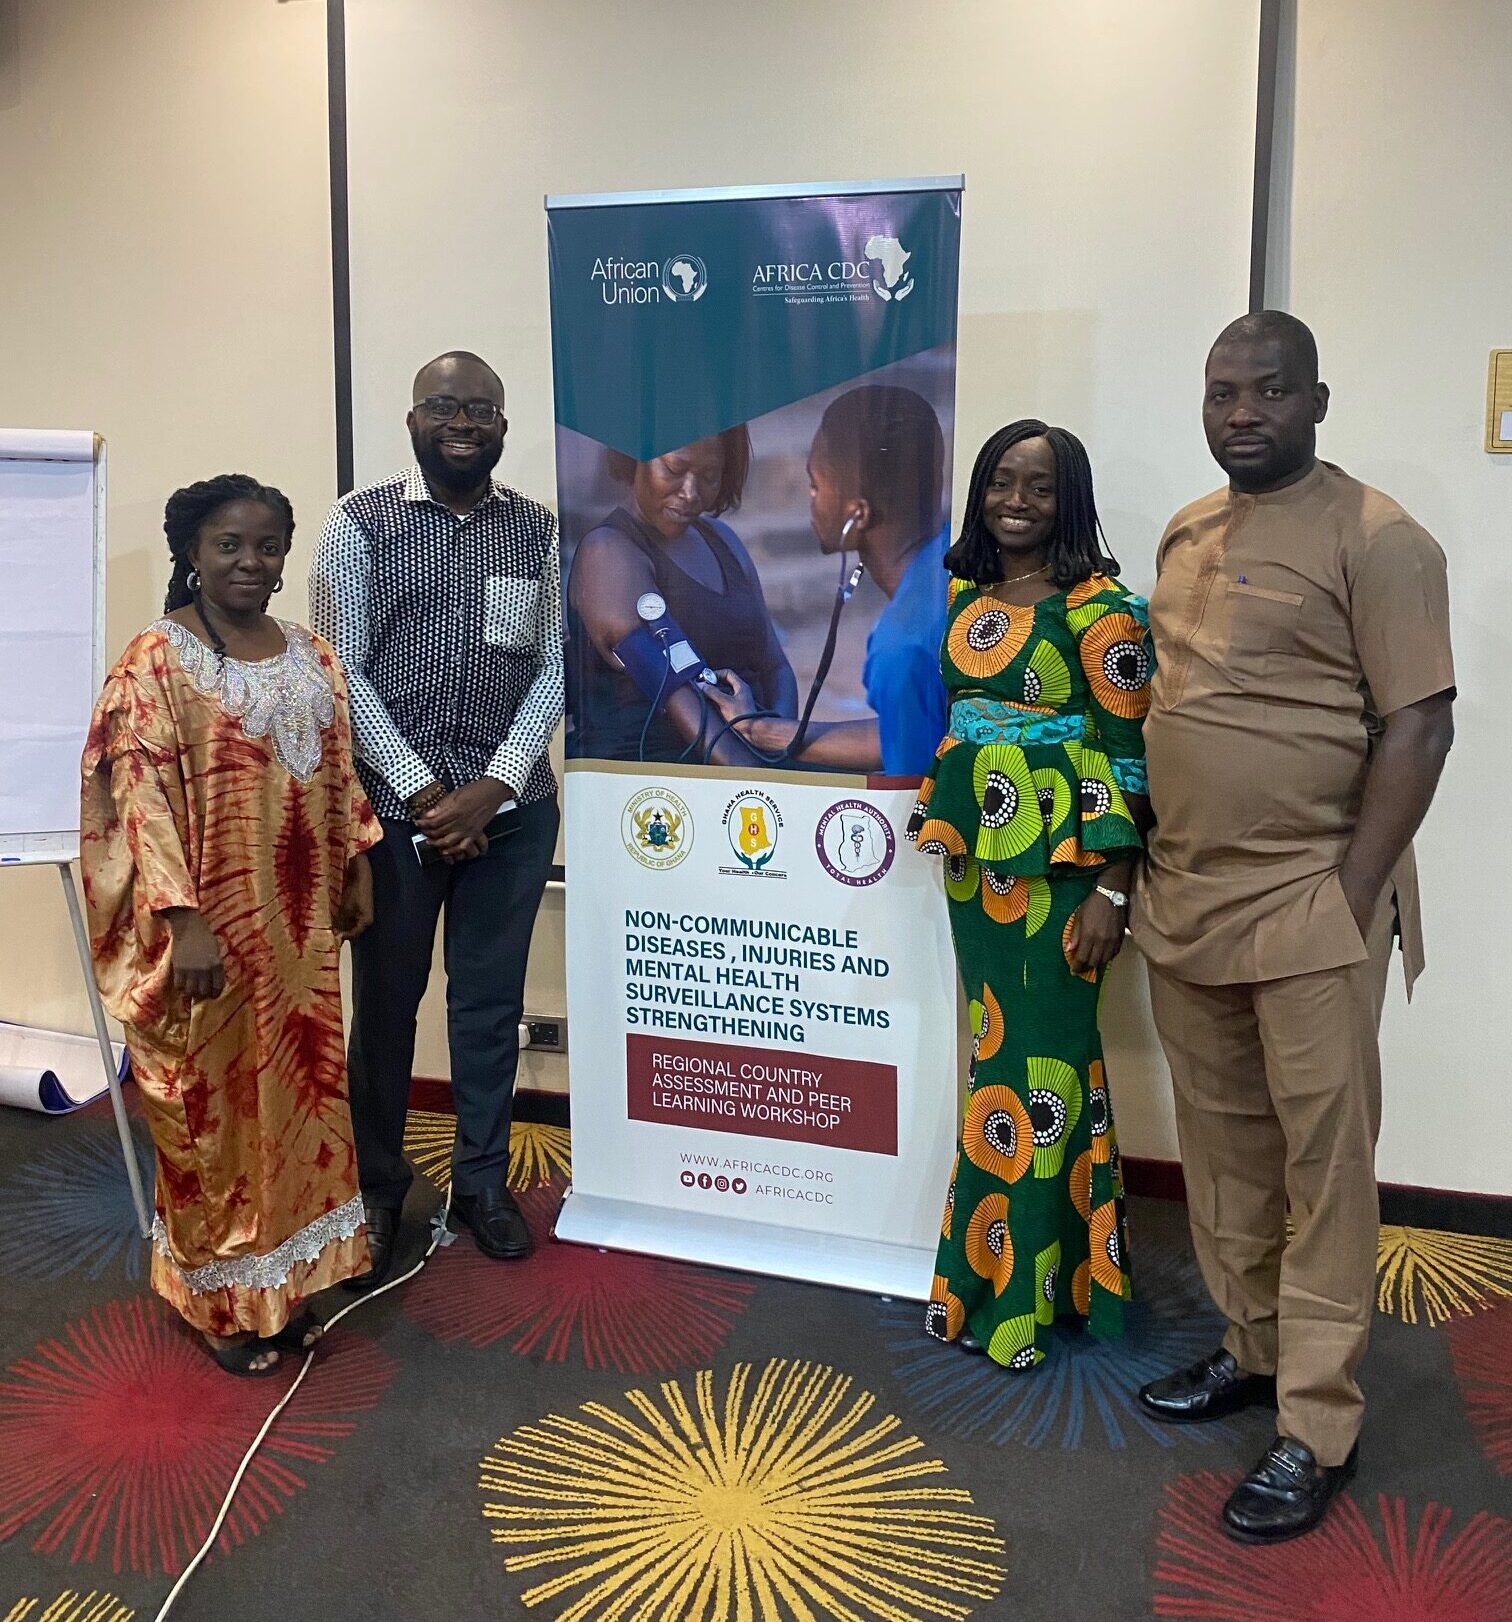 Center for Integration Science Participates in Africa CDC Workshop on Noncommunicable Diseases